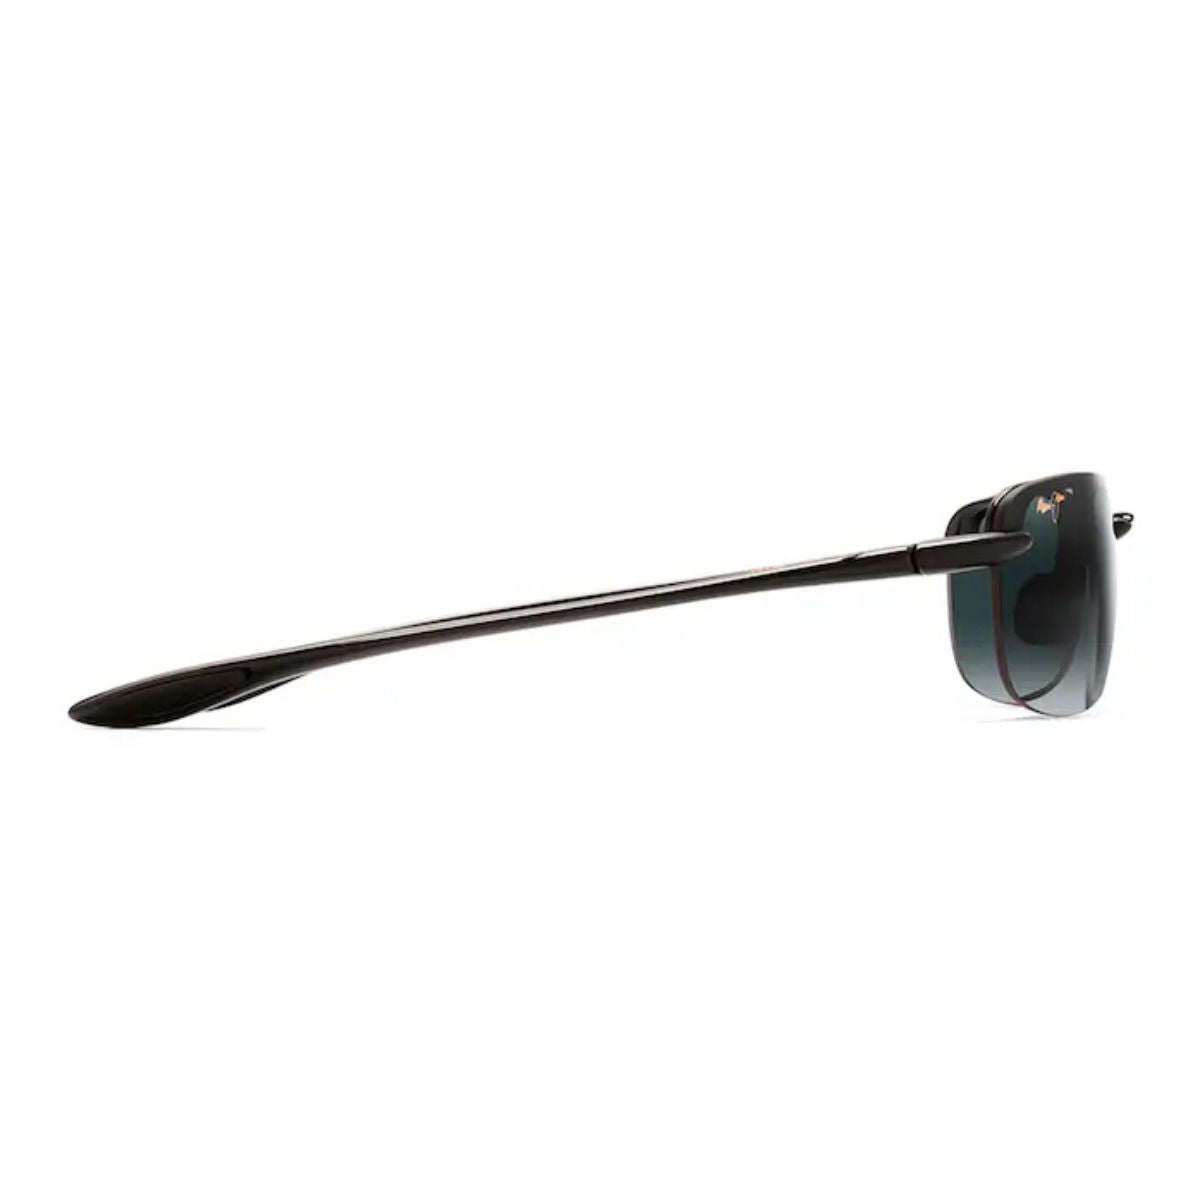 "Best Driving Sunglasses For Mens Online | Maui Jim Driving Goggles For Men's"